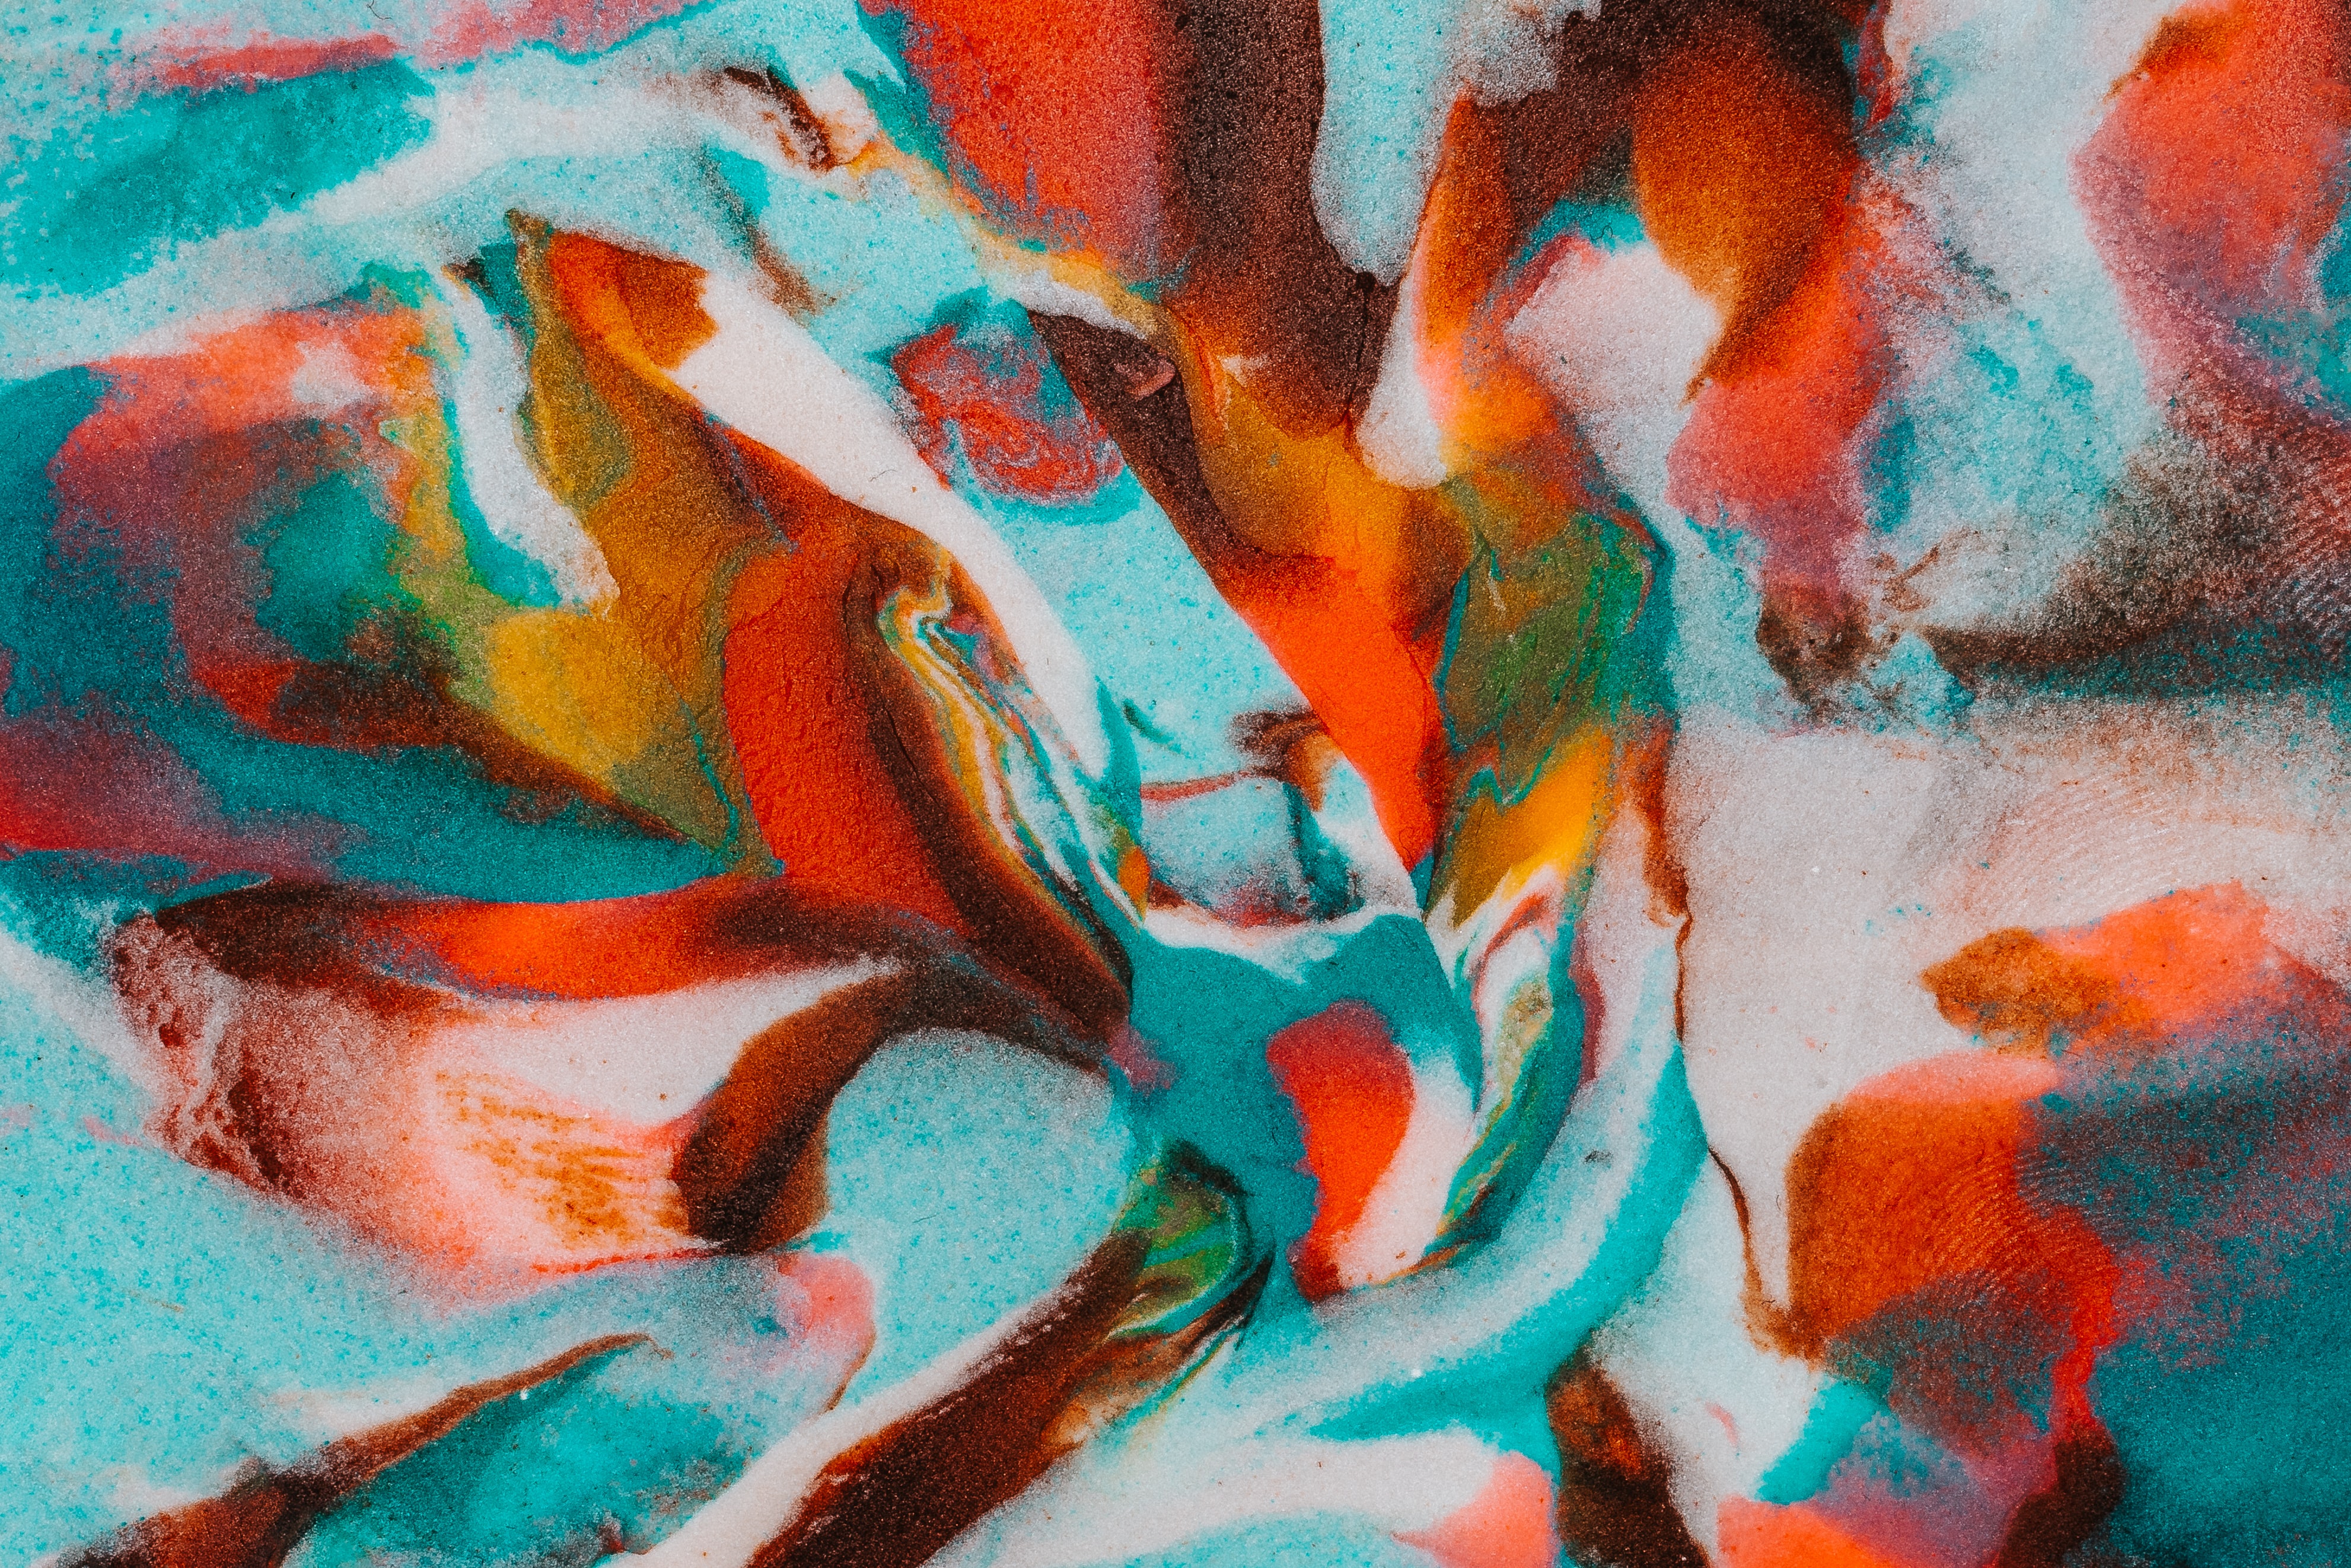 New Lock Screen Wallpapers motley, abstract, multicolored, paint, colors, color, stains, spots